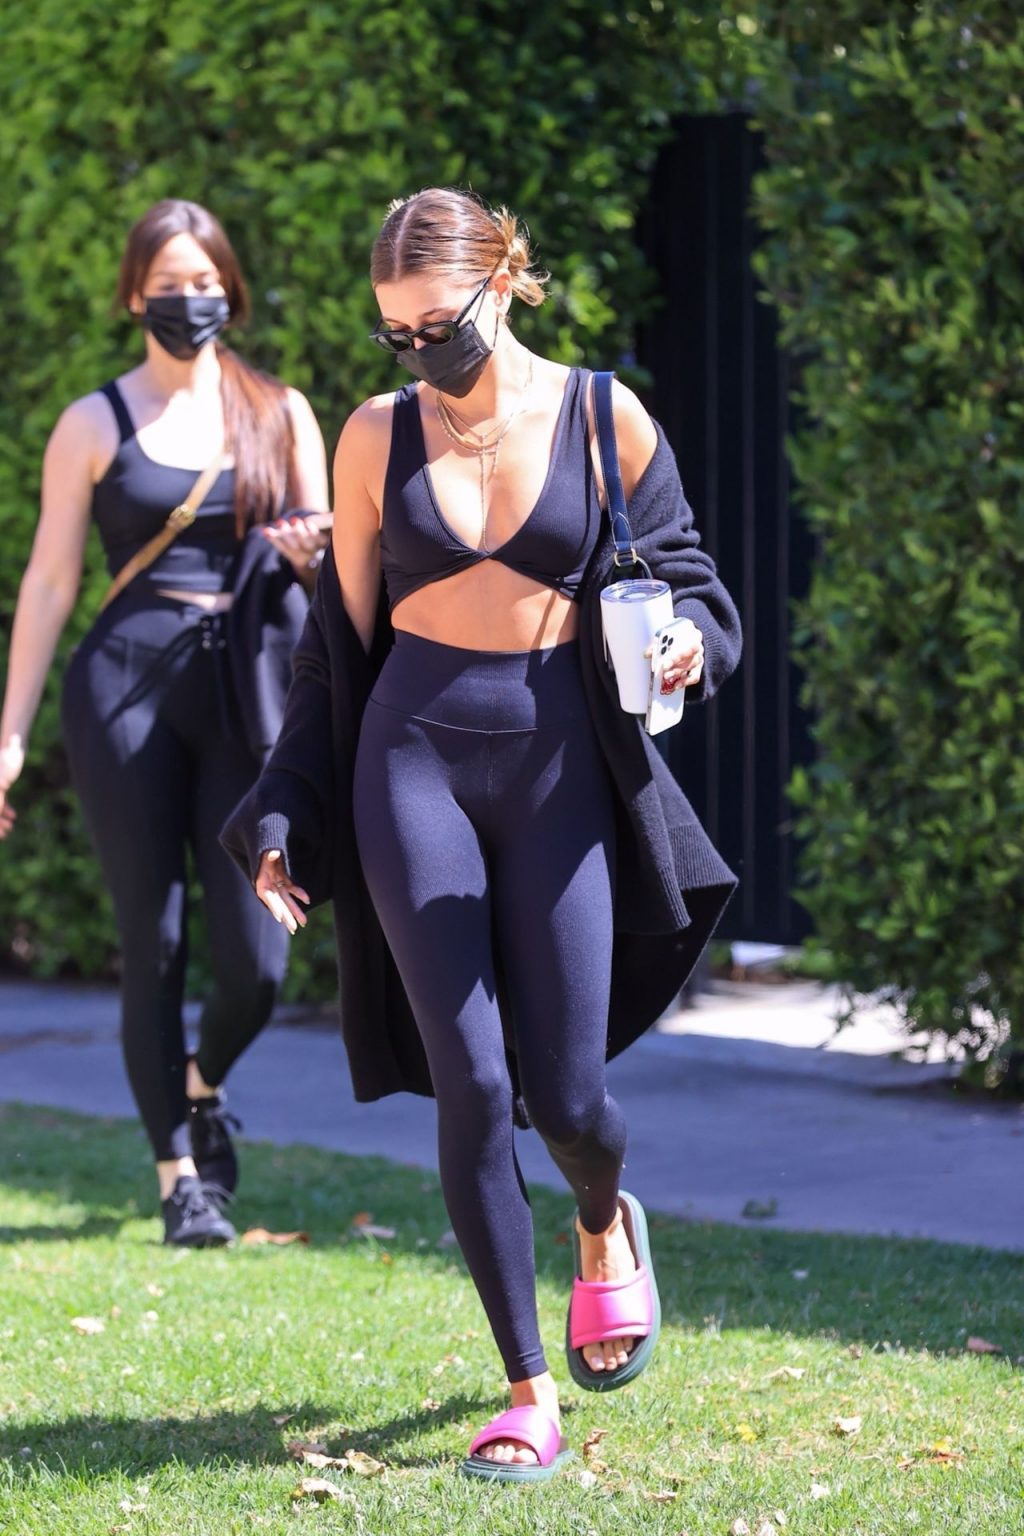 Hailey Bieber is Seen Leaving Pilates After a Workout in LA (68 Photos)